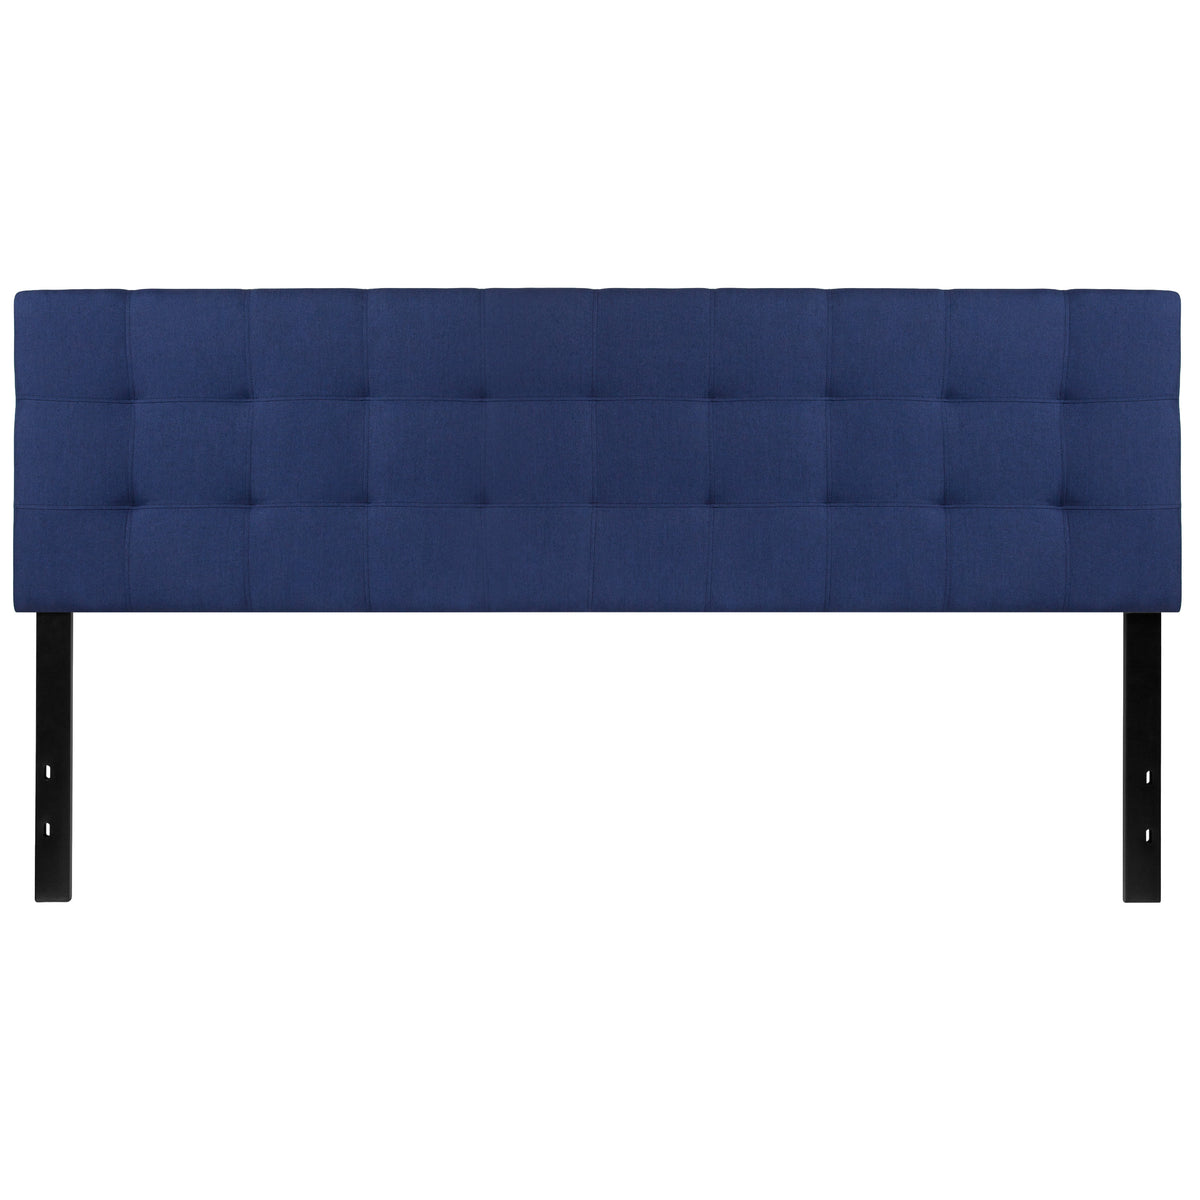 Navy,King |#| Quilted Tufted Upholstered King Size Headboard in Navy Fabric